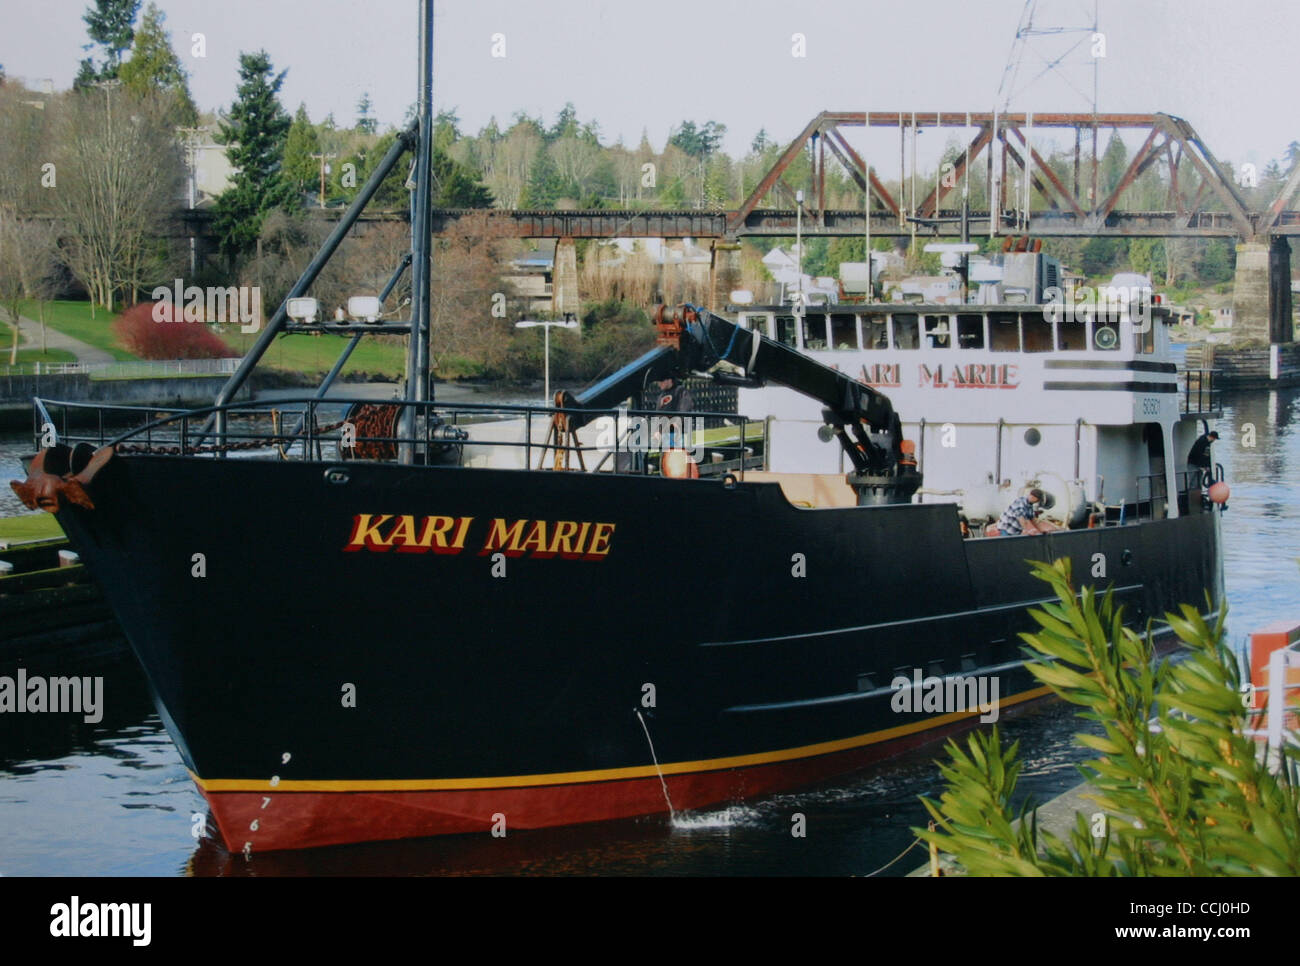 The 123 foot ship Kari Marie, a Bering Sea crabber owned and captained Jon  Forsythe enters the Ballard Locks in Seattle. Jon recused his parents from  their sinking van seconds before it